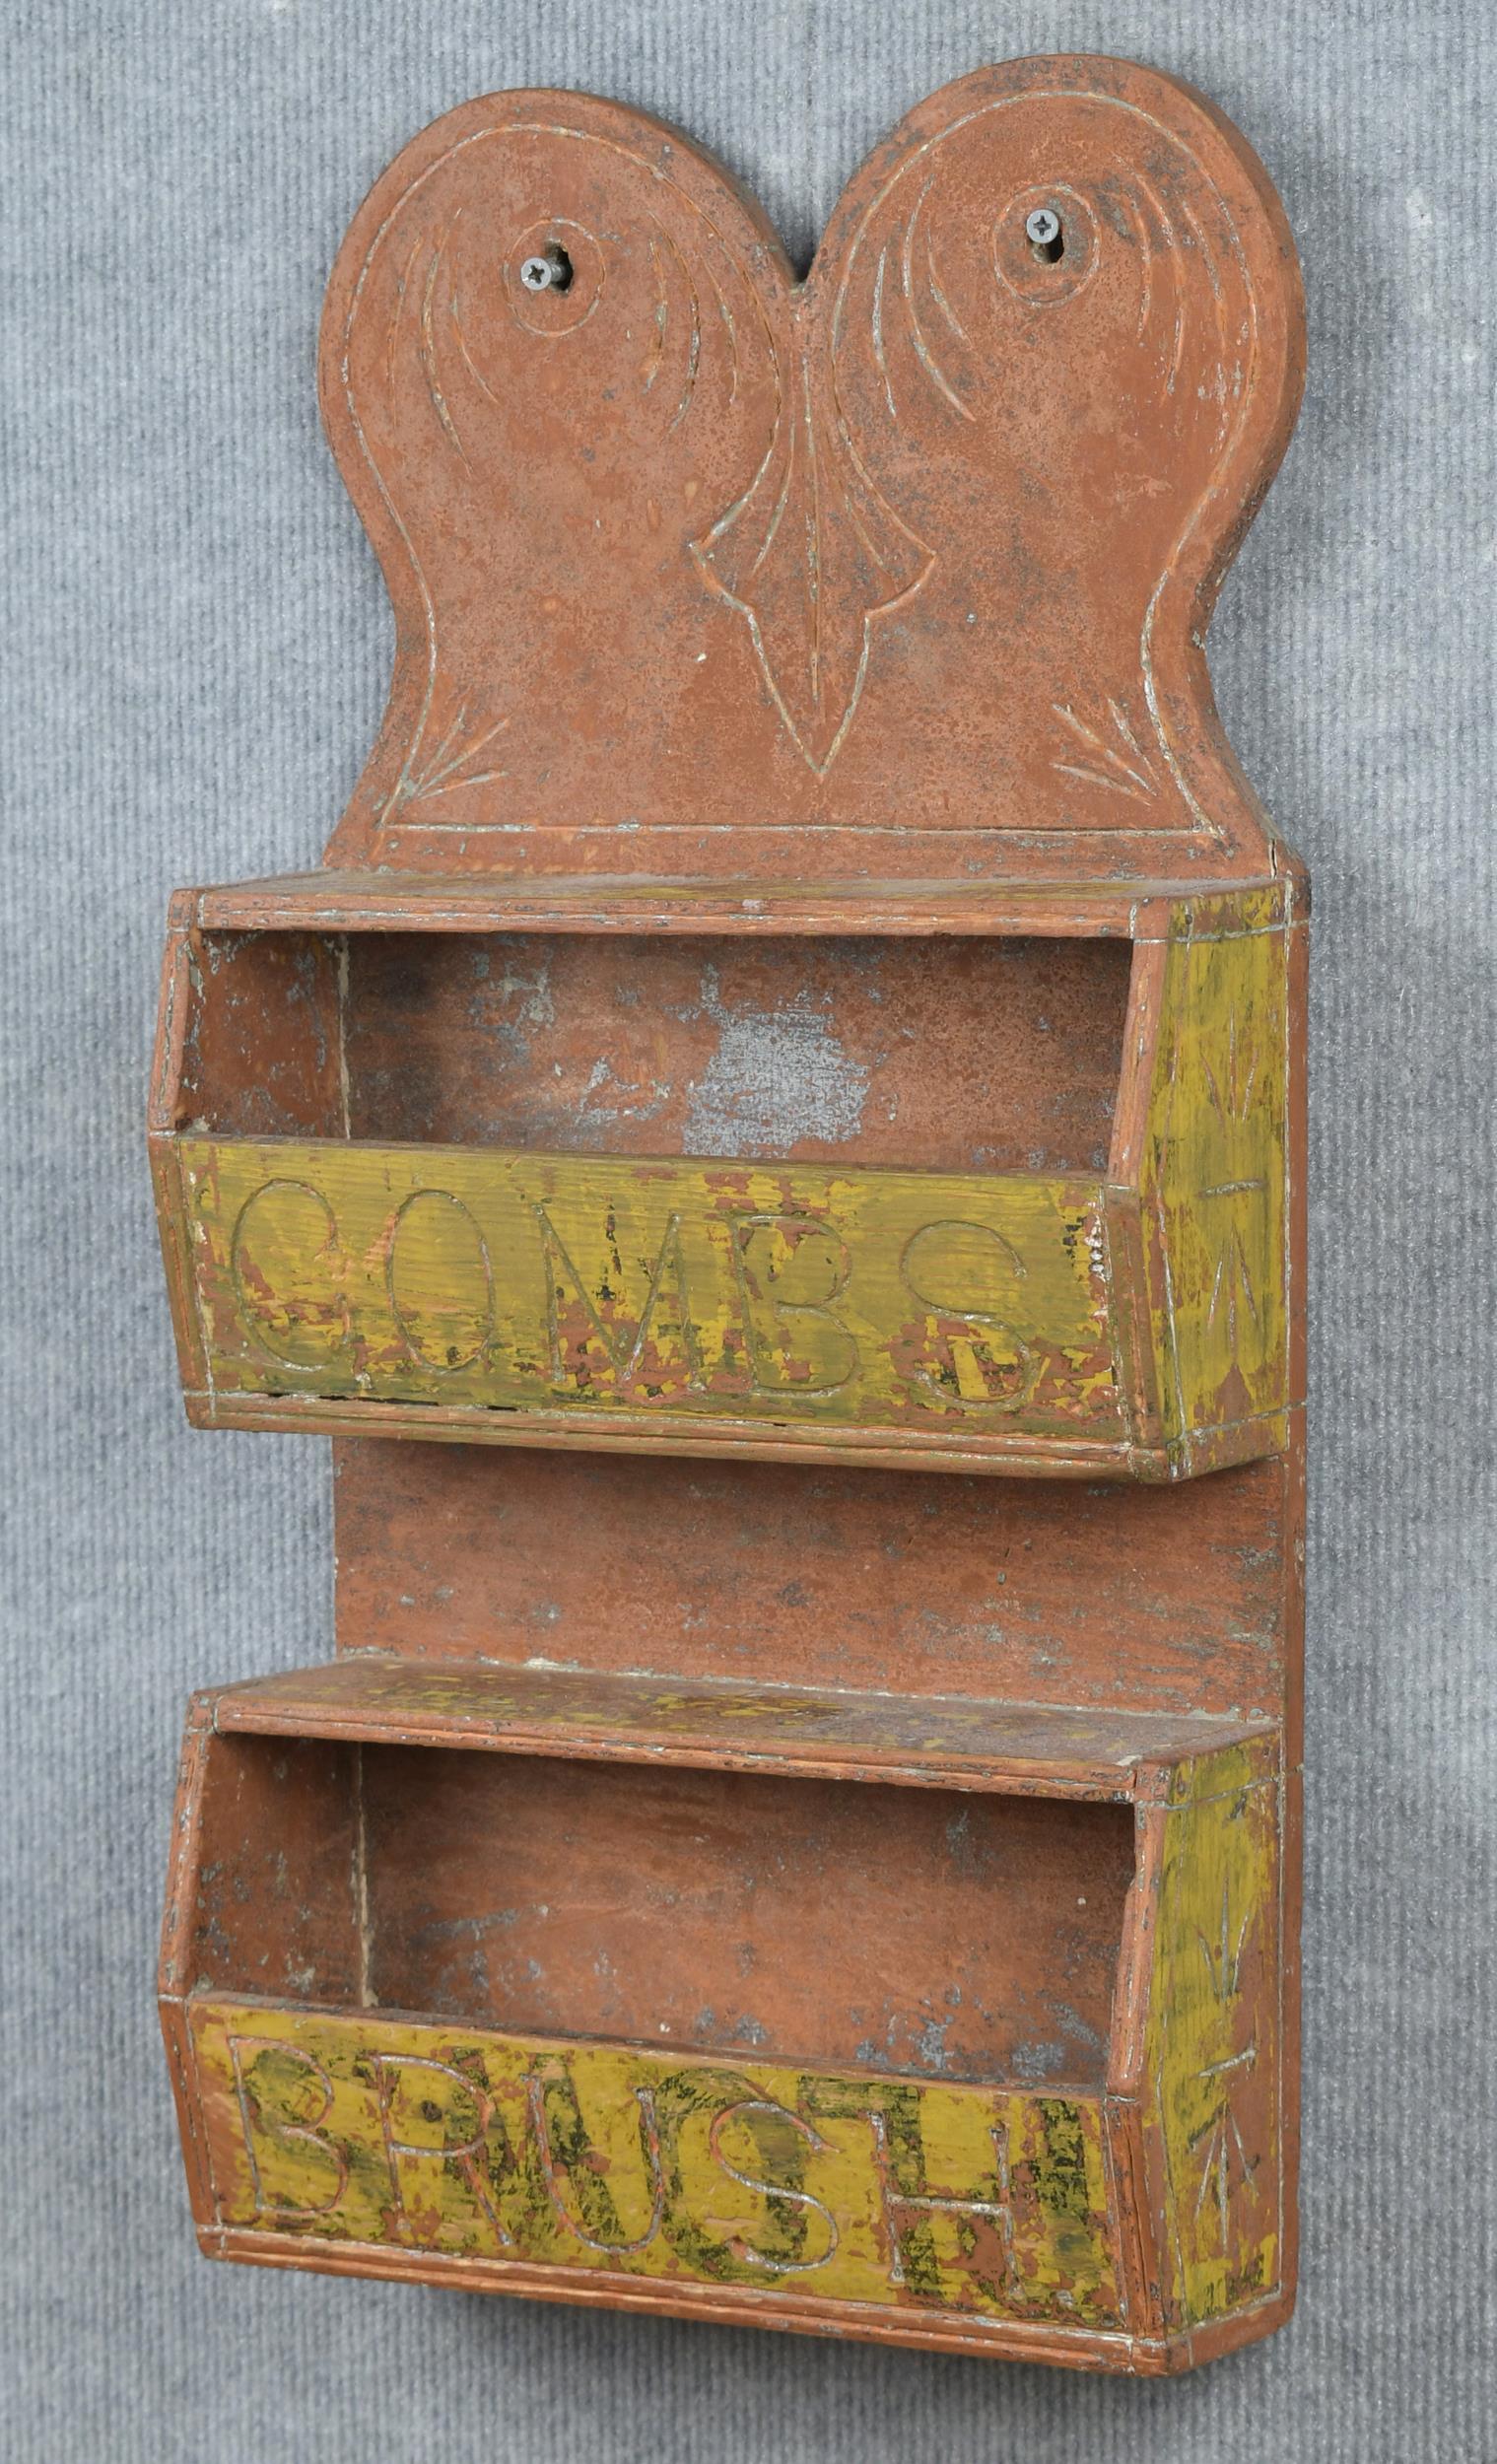 19TH C. PAINTED WALL BOX. Heart